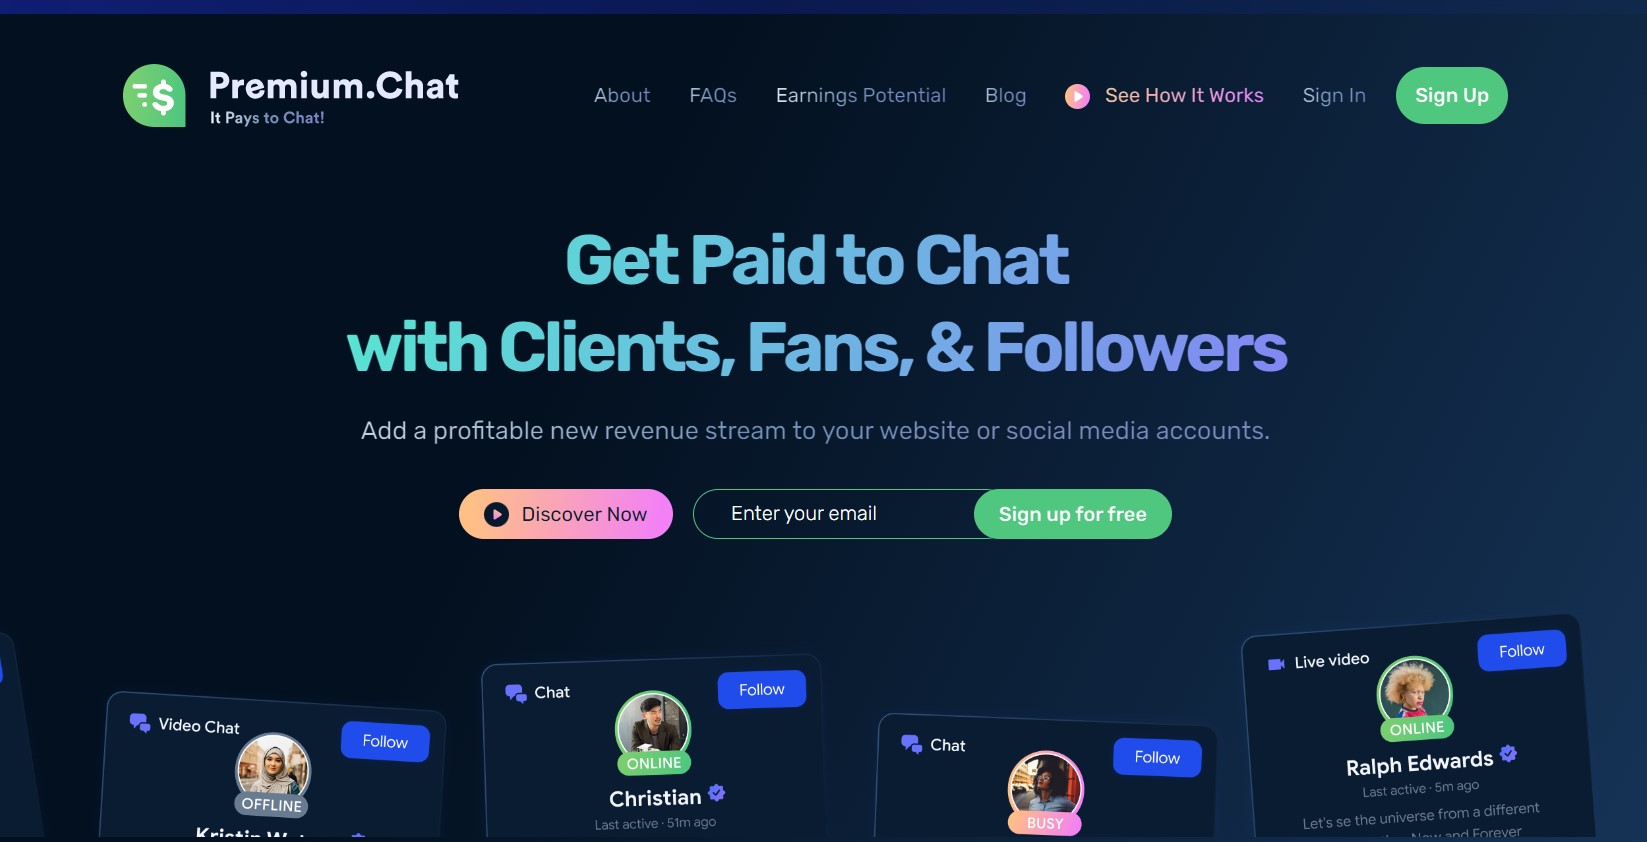 Get paid to chat